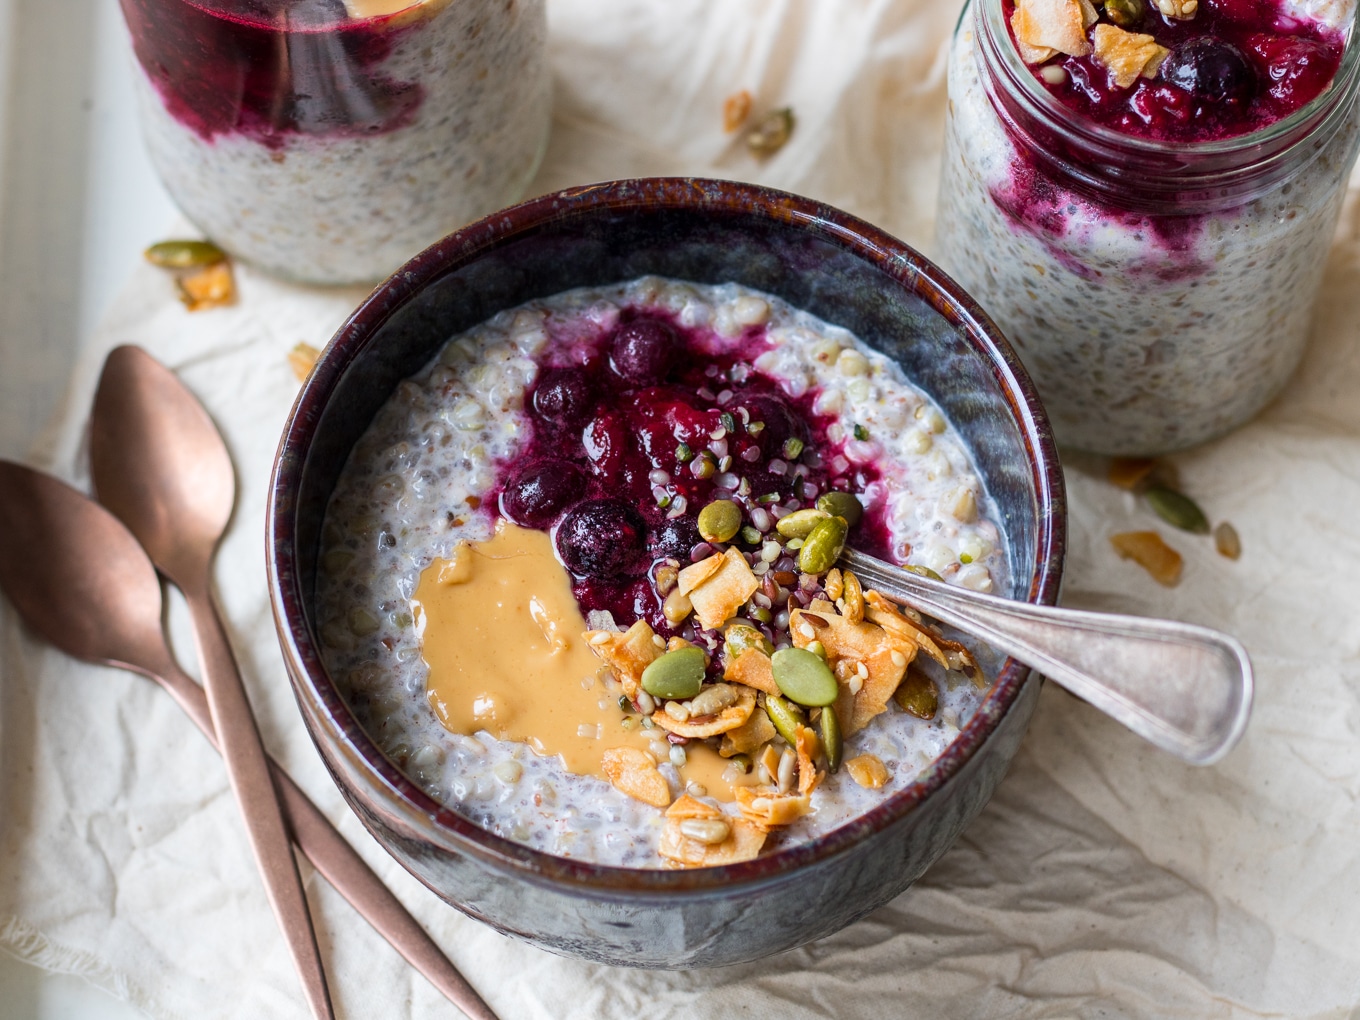 Buckwheat bircher in a small blue ceramic bowl, berries, nut butter and granola on top